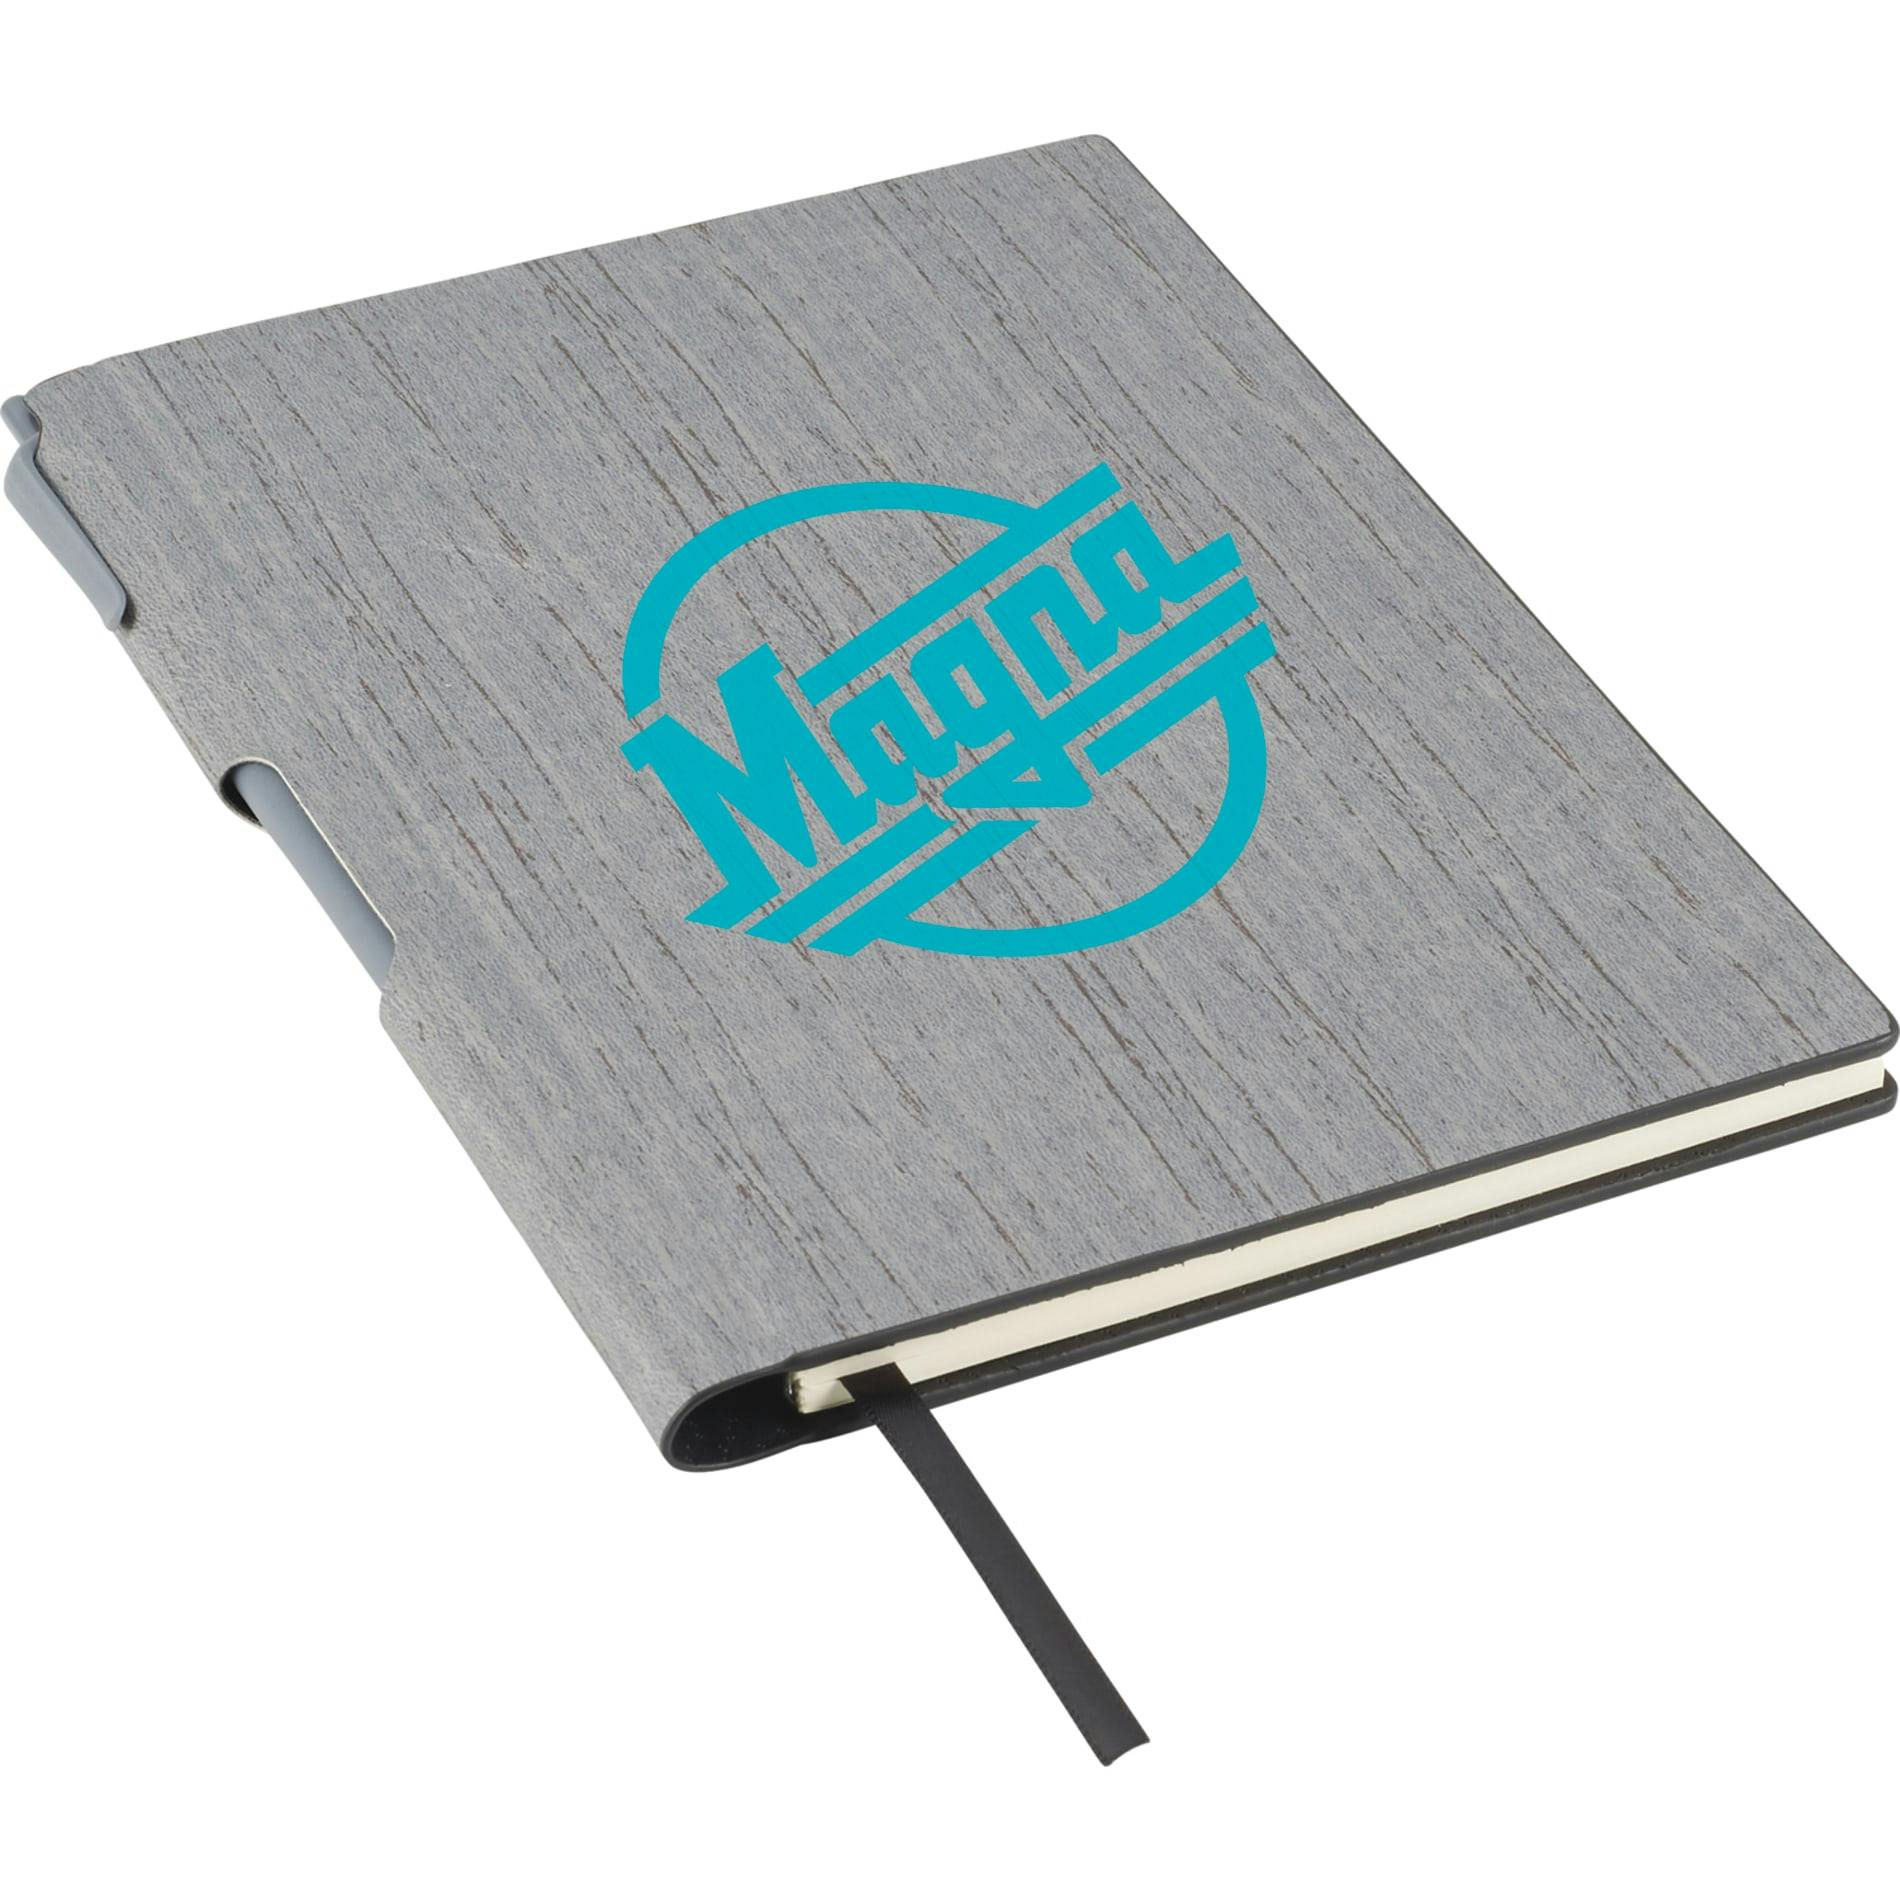 6" x 8.5" Bari Notebook with Pen - additional Image 1